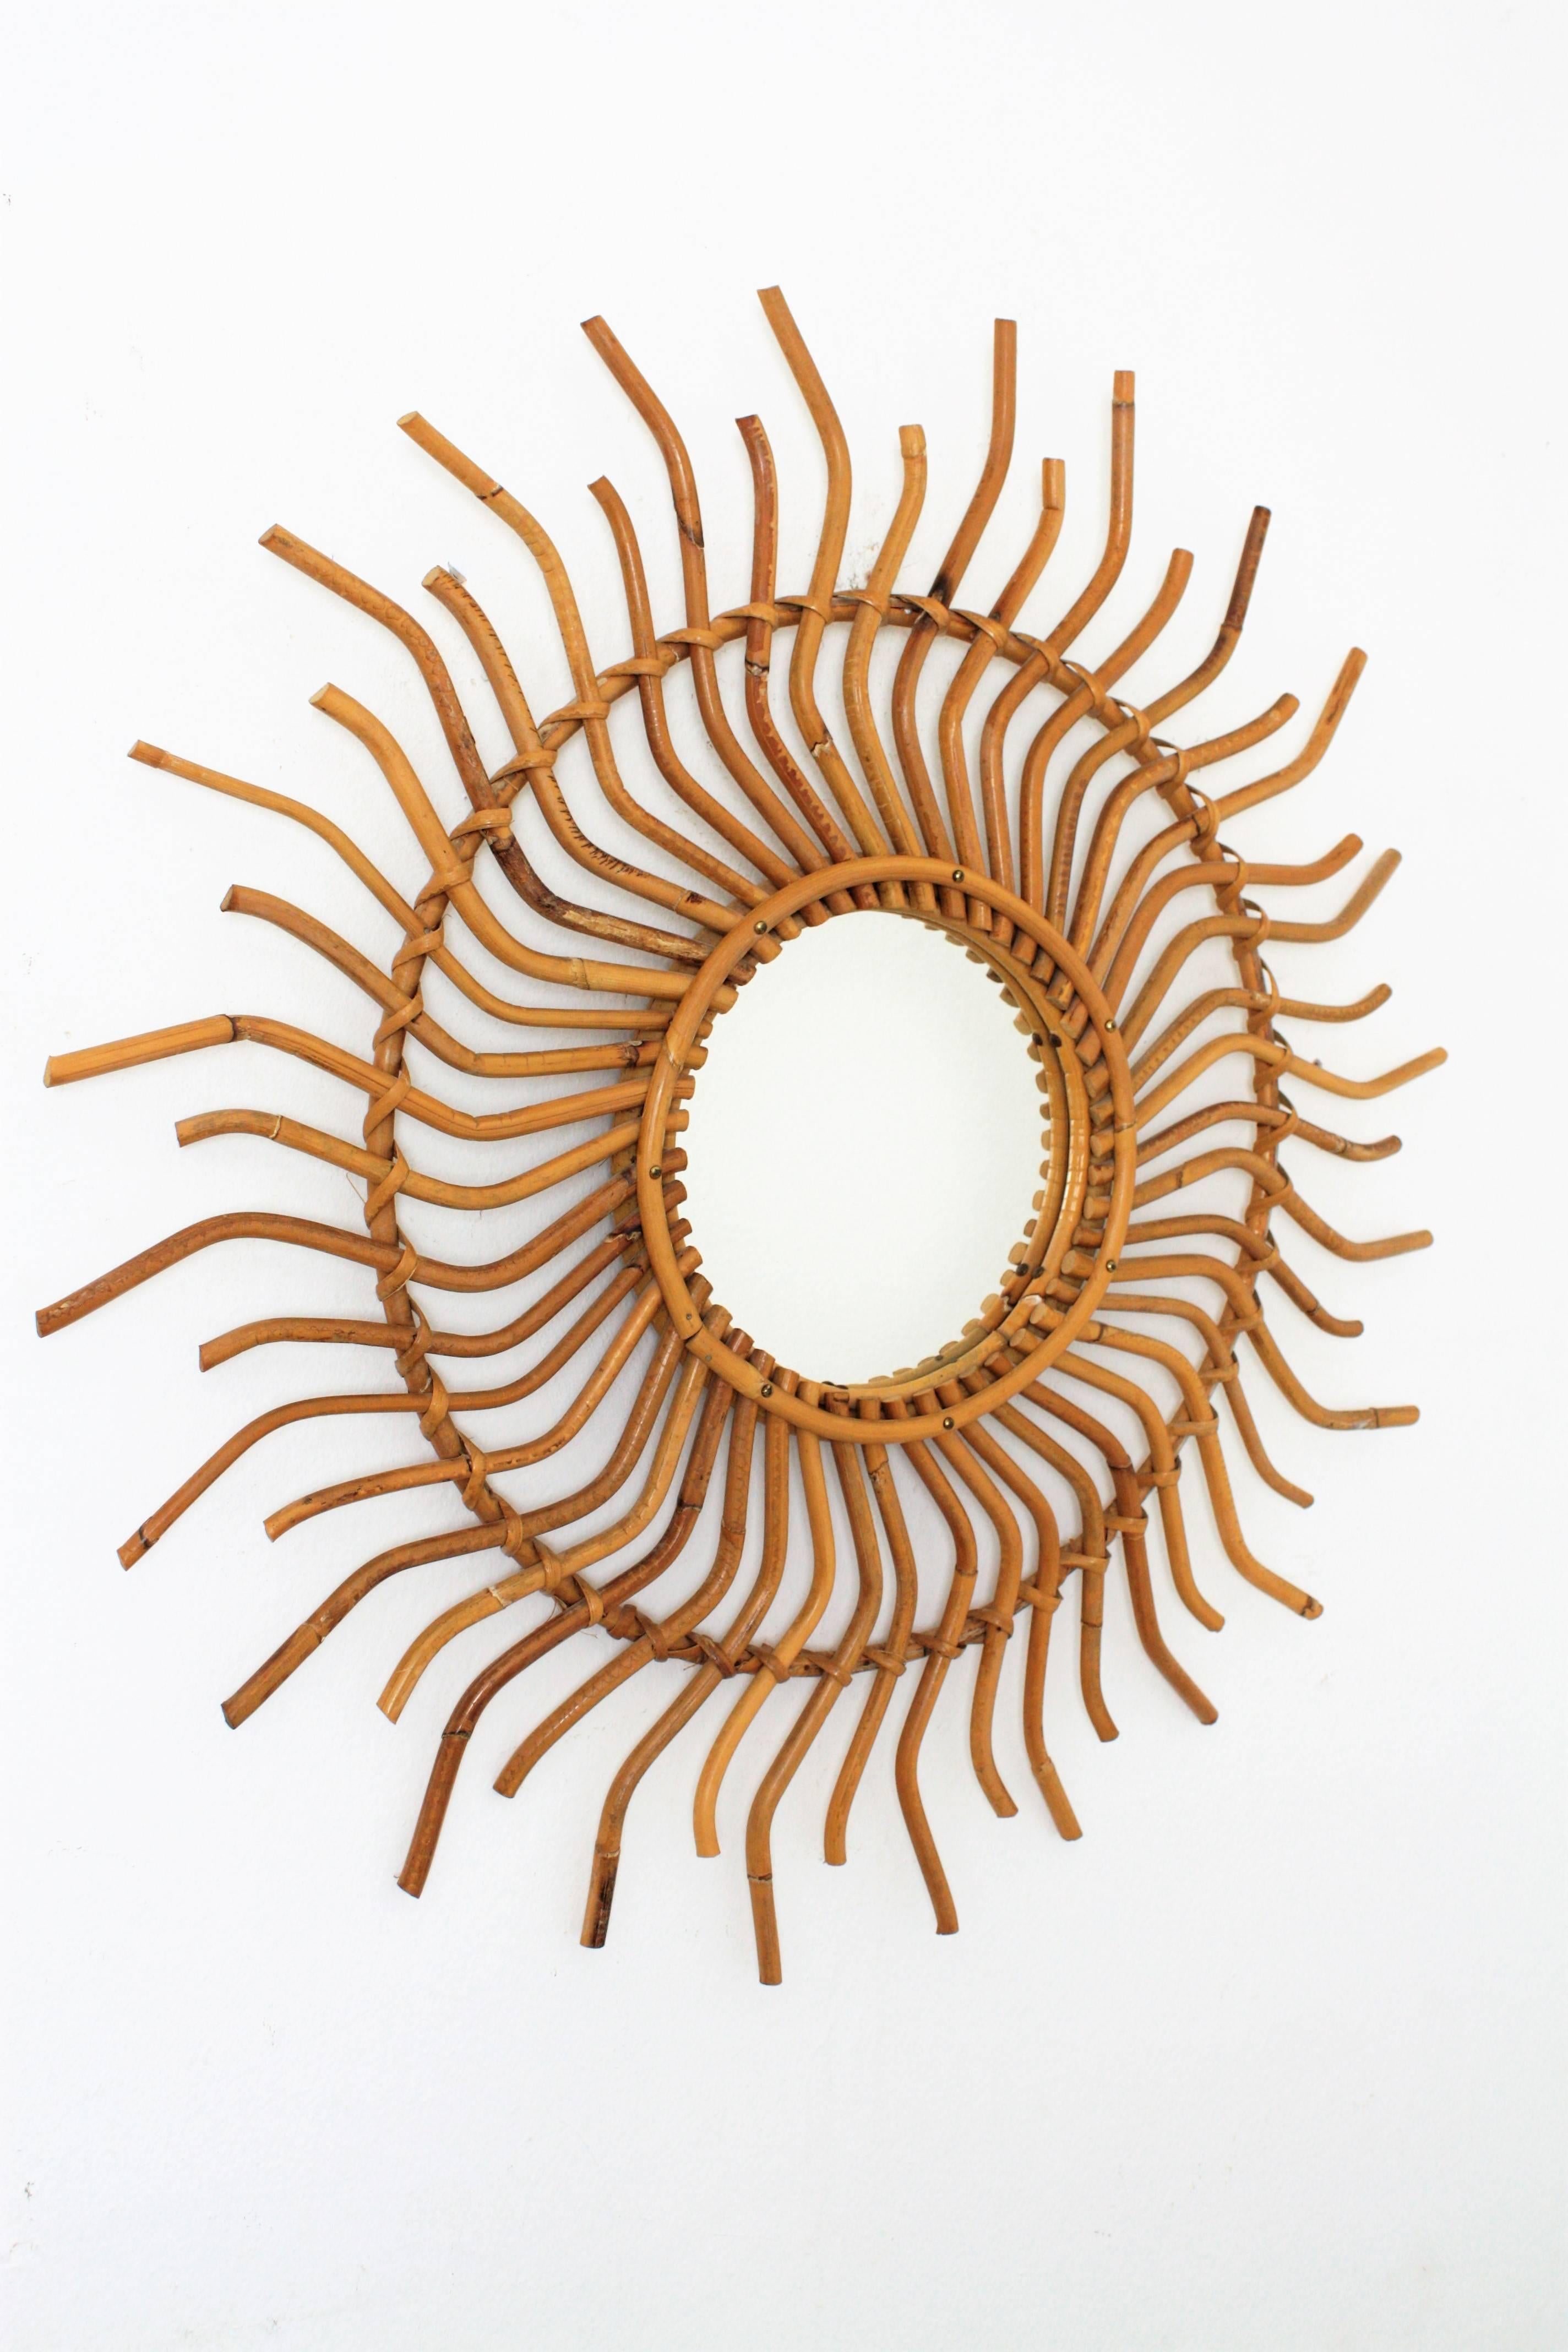 Spectacular midcentury modernist bamboo and rattan sunburst mirror with curly beams. Its pinwheel shape make this mirror specially beautiful.
Amazing to place it alone or in a wall decoration with other mirrors in natural fiber, 
Spain,